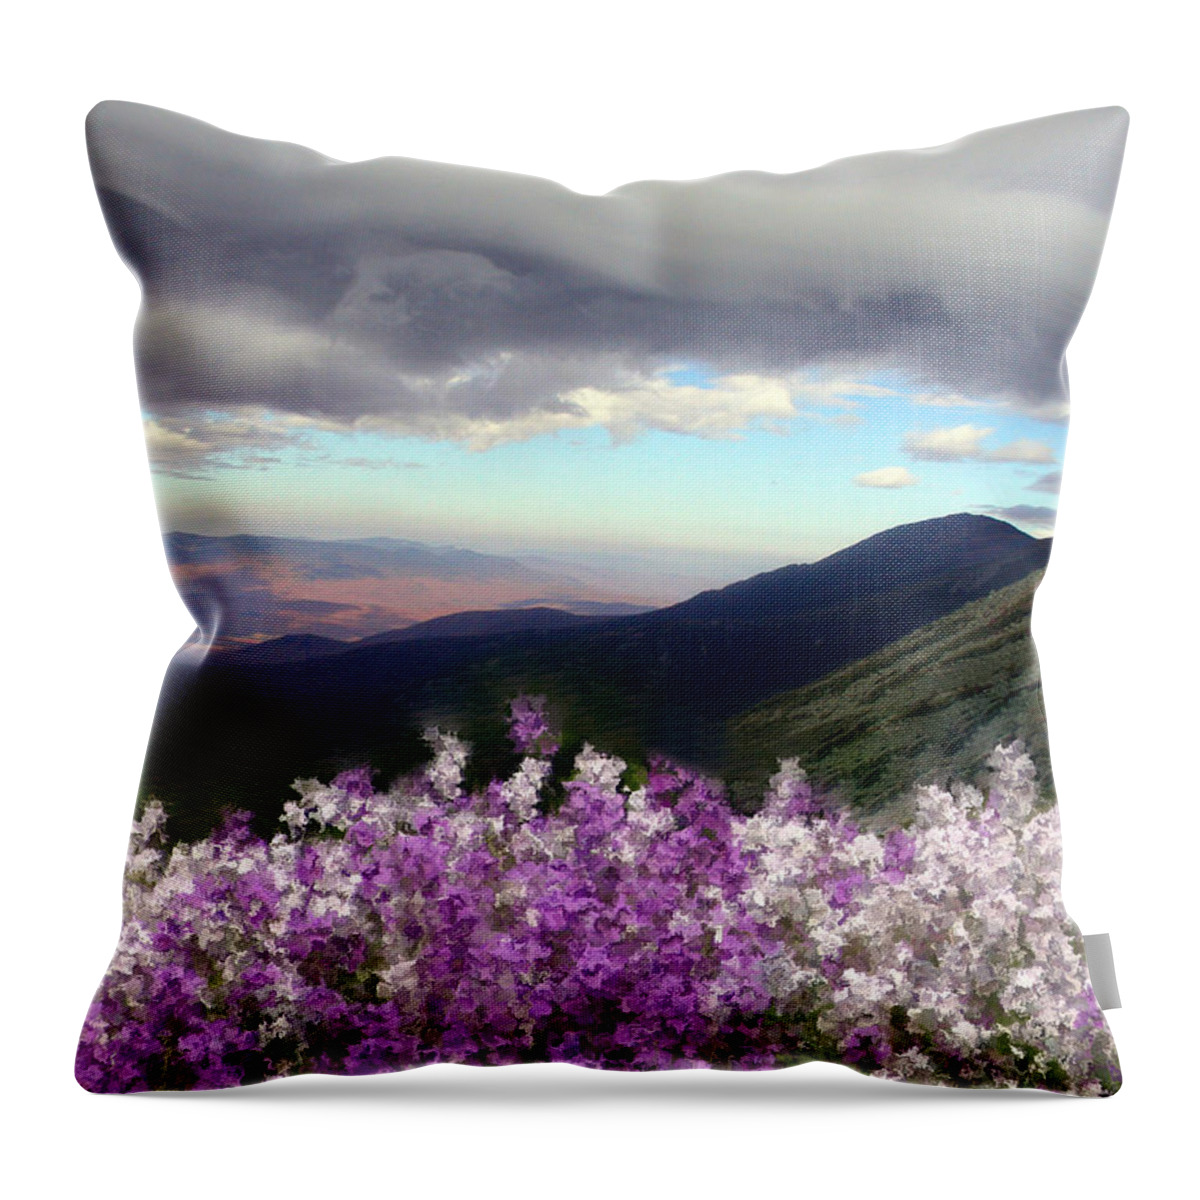 Phlox Throw Pillow featuring the photograph Presidential Phlox Storm by Wayne King